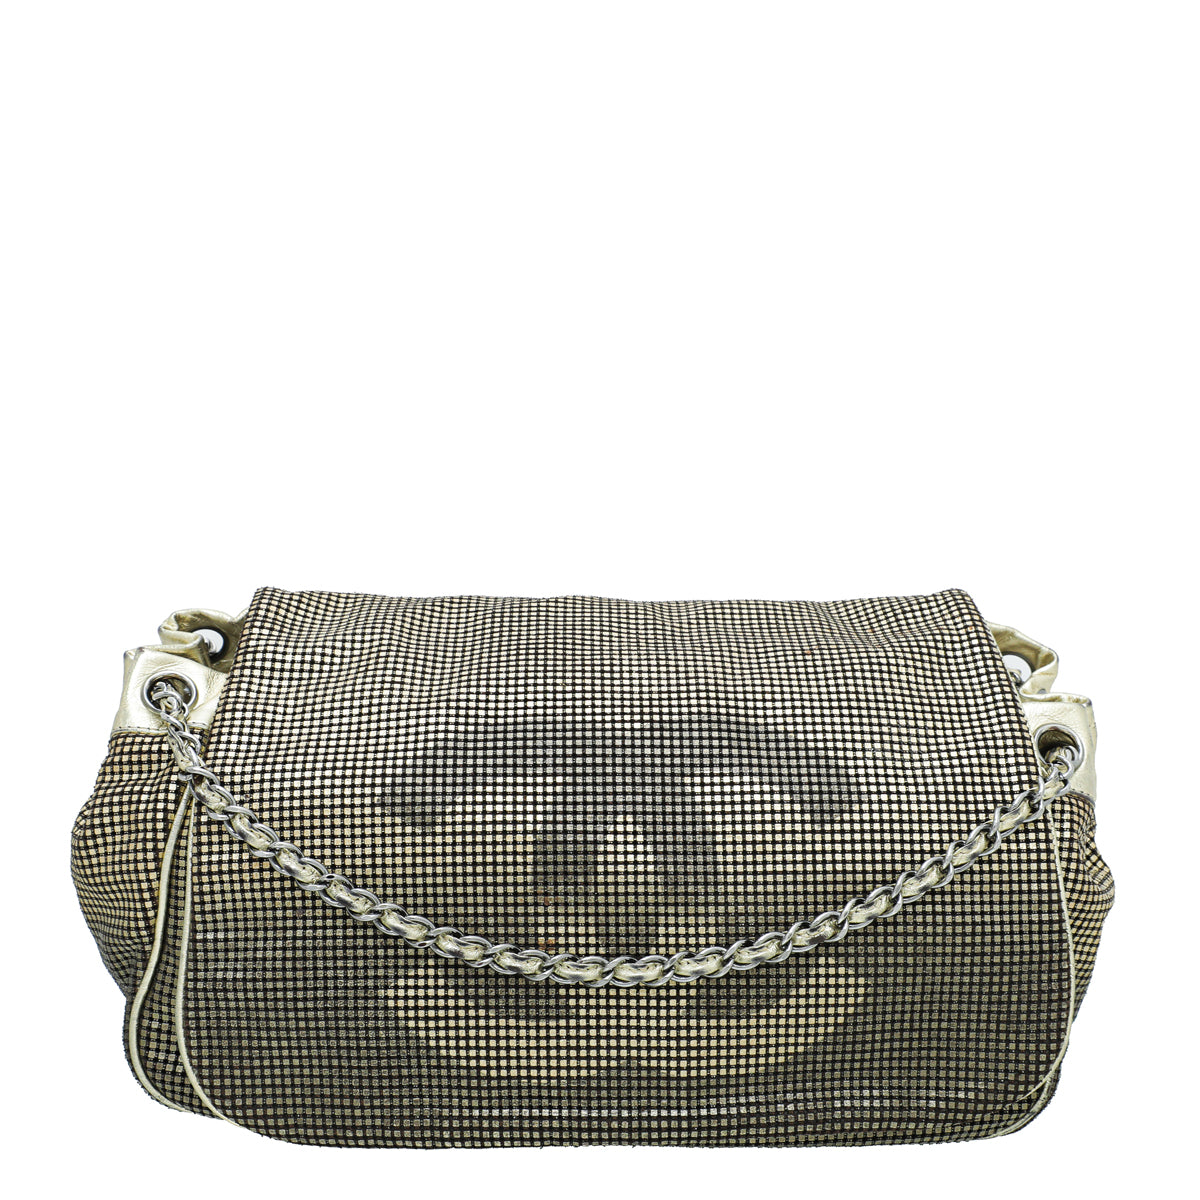 Chanel Gold CC Perforated Hollywood Accordion Flap Bag